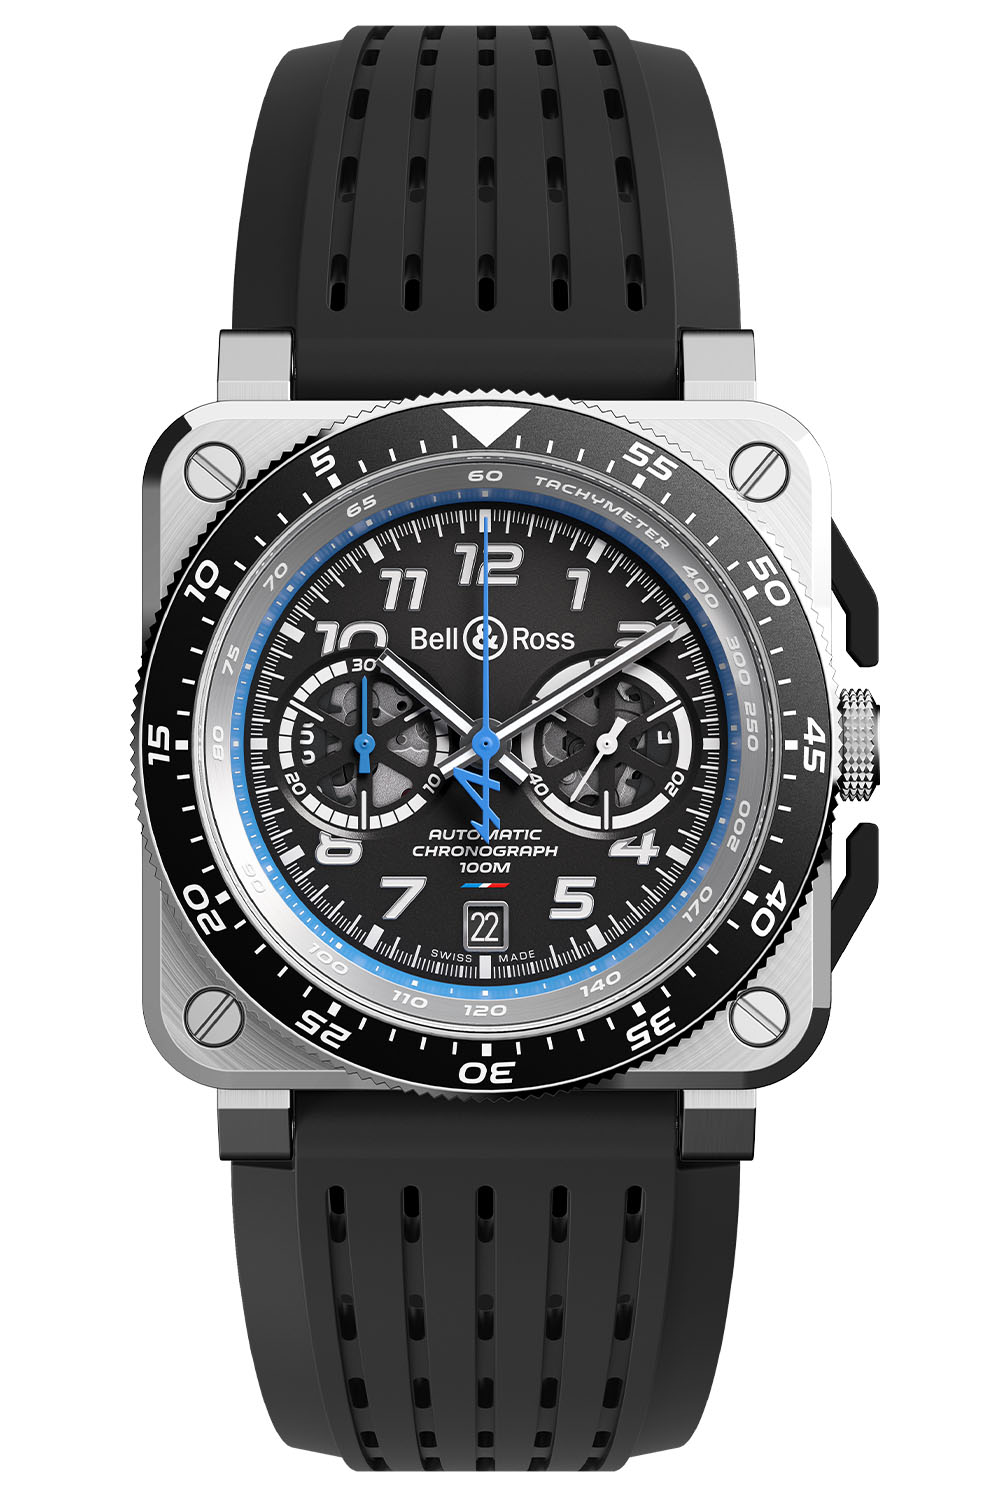 Bell & Ross Alpine F1 Team A521 Collection